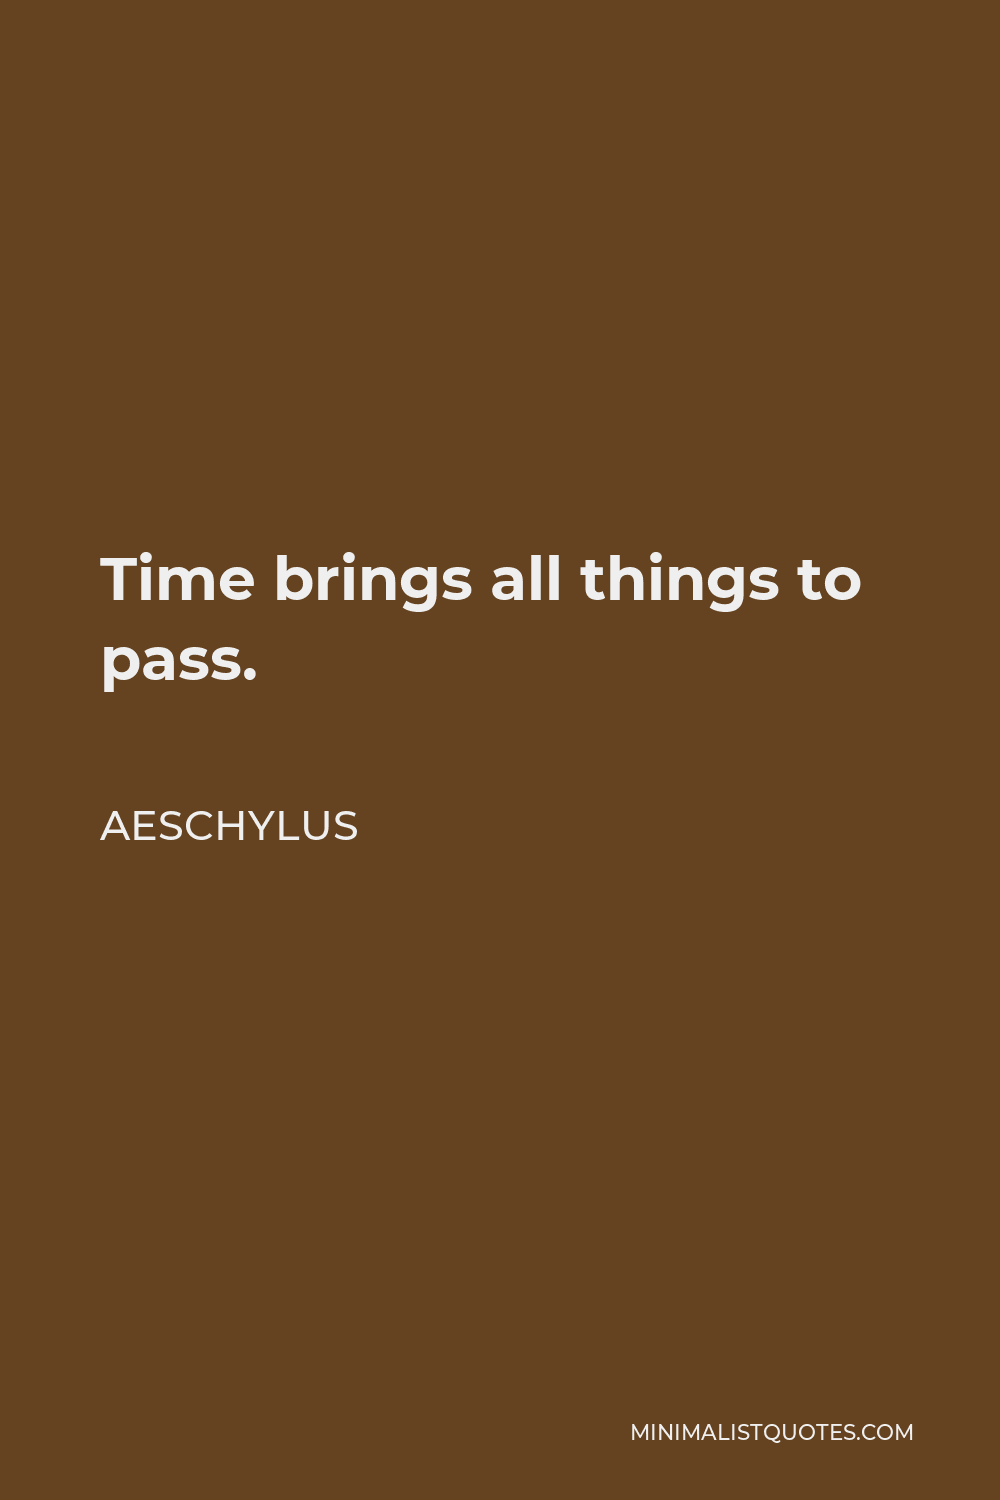 Aeschylus Quote - Time brings all things to pass.